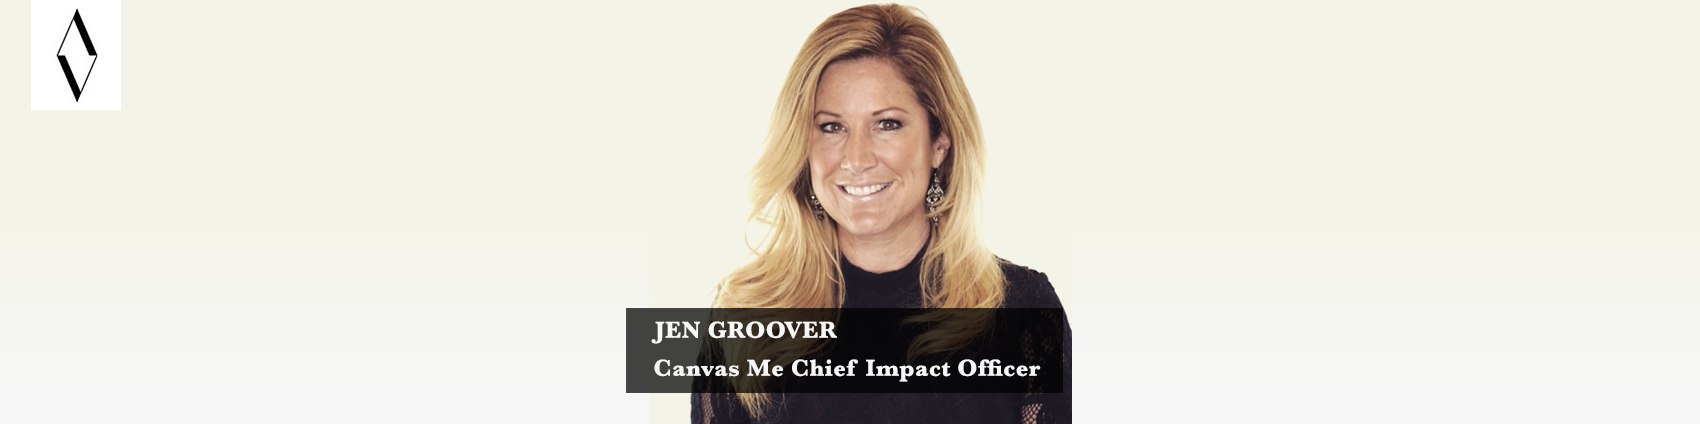 Jen Groover Joins Canvas Me as Chief Impact Officer